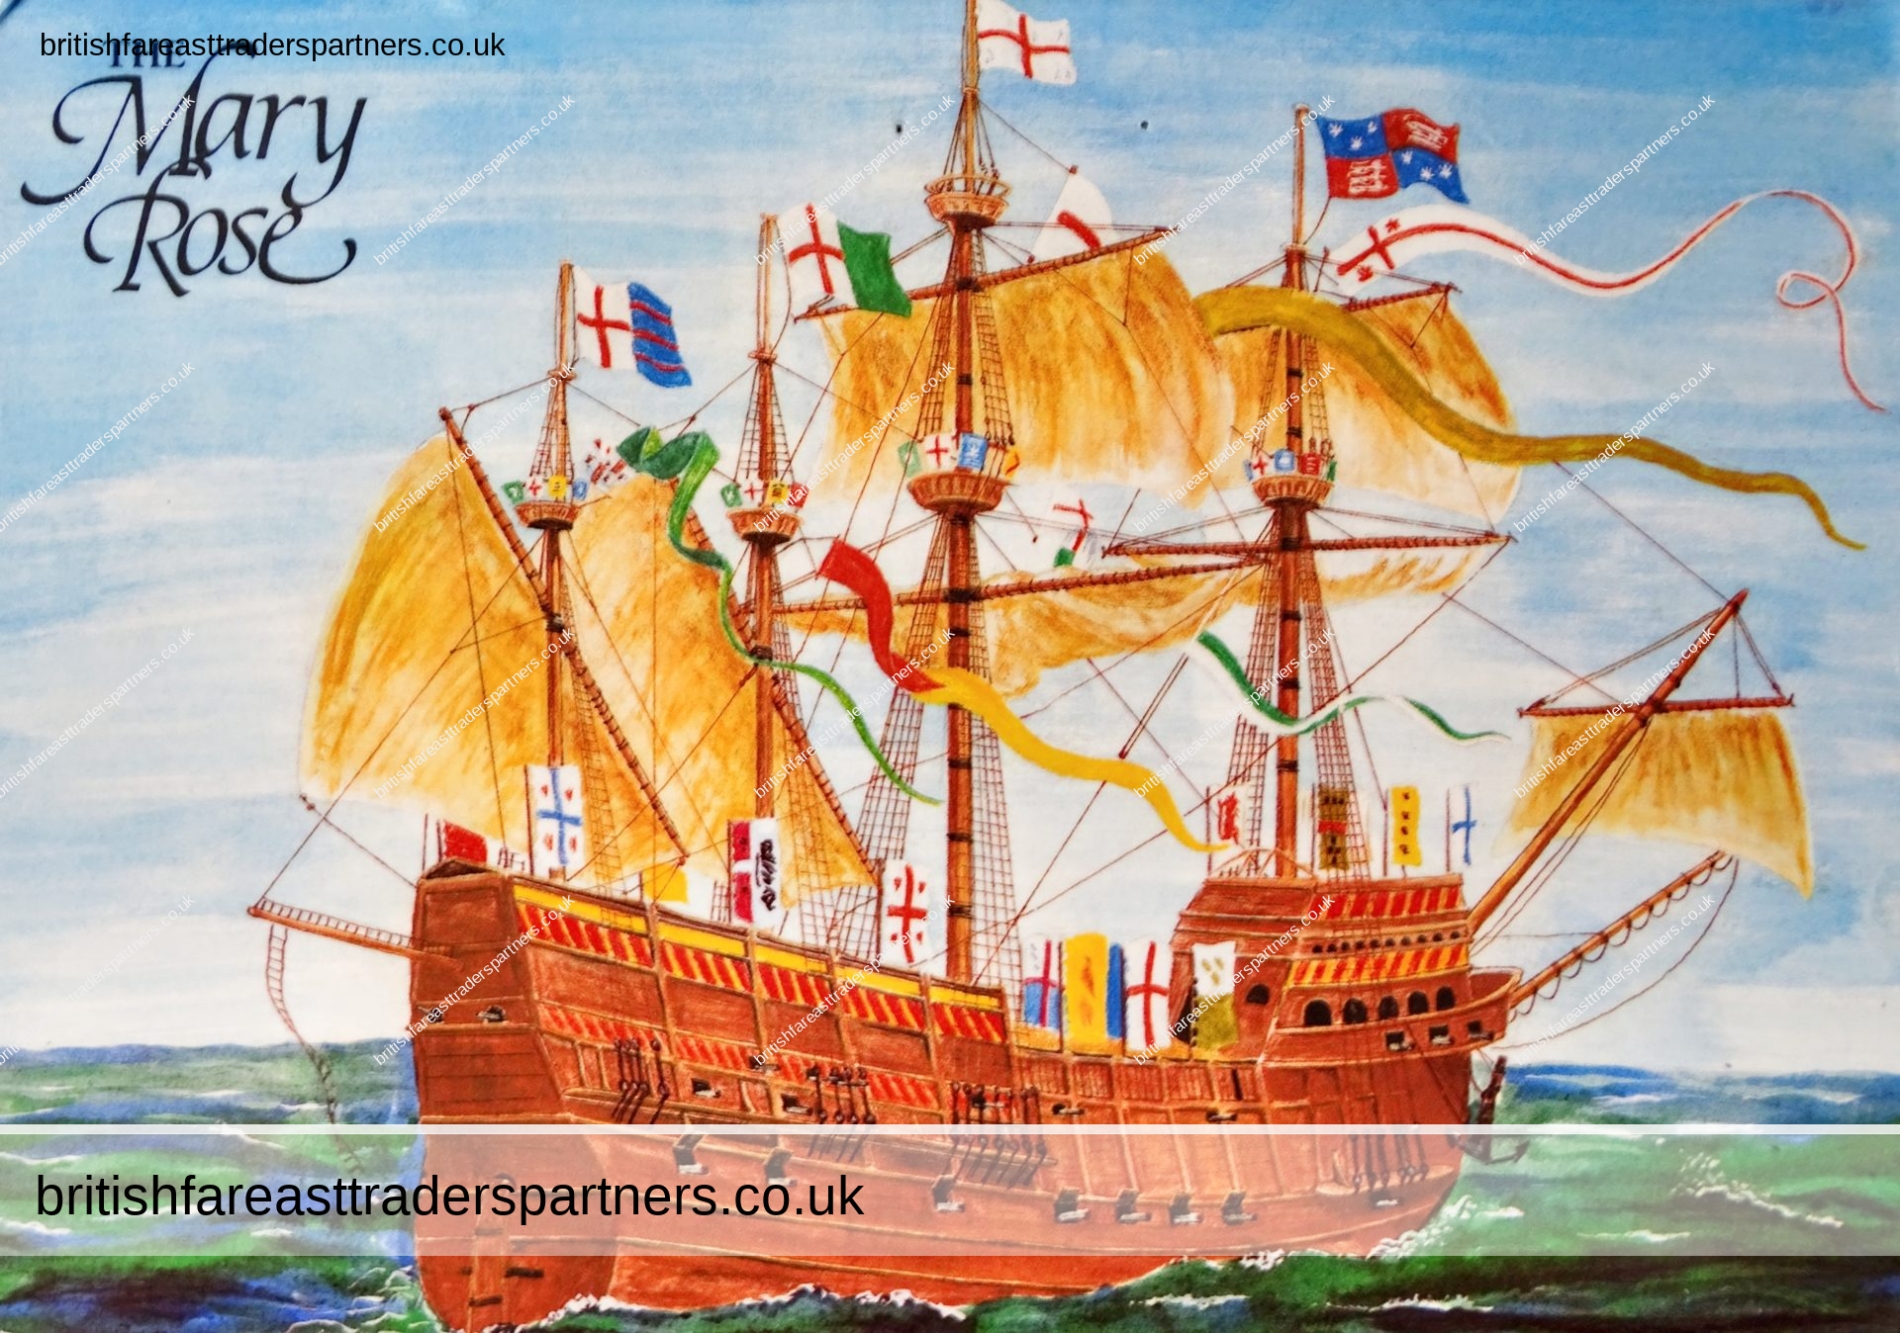 VINTAGE “THE MARY ROSE” POSTCARD OLD ENGLISH WARSHIP BUILT BETWEEN 1509-10 AT PORTSMOUTH NAMED AFTER MARY TUDOR YOUNGER SISTER OH KING HENRY VIII PAINTING BY T.V.ELMES JANON DISTRIBUTION POSTCARD POSTMARKED NESTLE KITKAT Collectables > Transportation Collectables > Nautical > Other Nautical VINTAGE | MARITIME | HERITAGE | HISTORY | TUDOR MONARCH